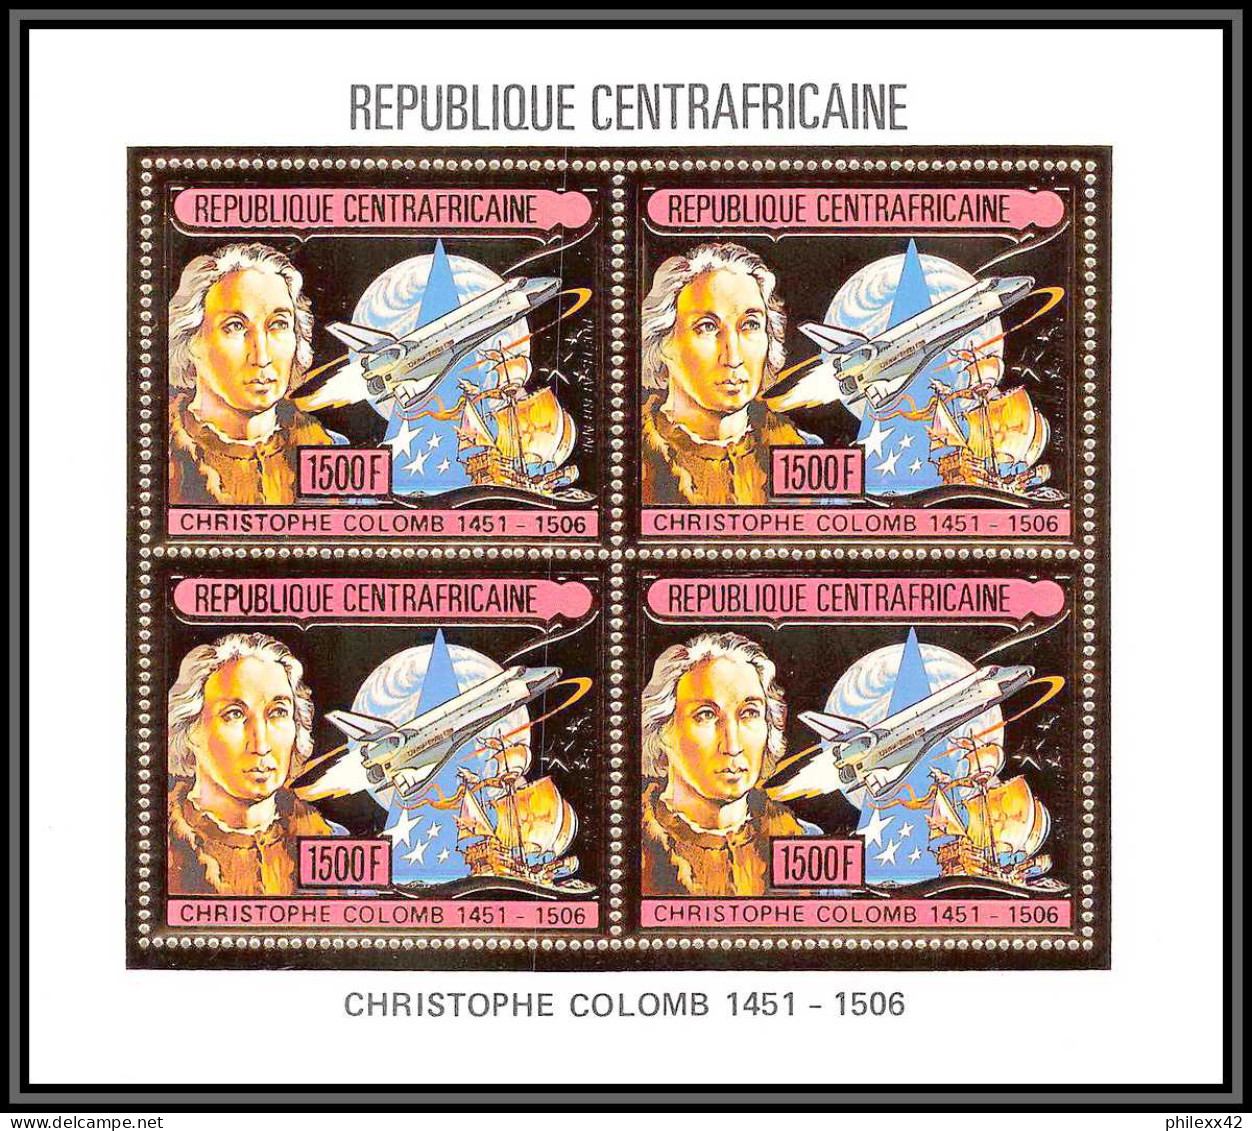 85988/ N°1201 A Christophe Colomb Christopher Columbus Centrafricaine OR Gold ** MNH Espace Space Bloc 4 Discount - Christoffel Columbus